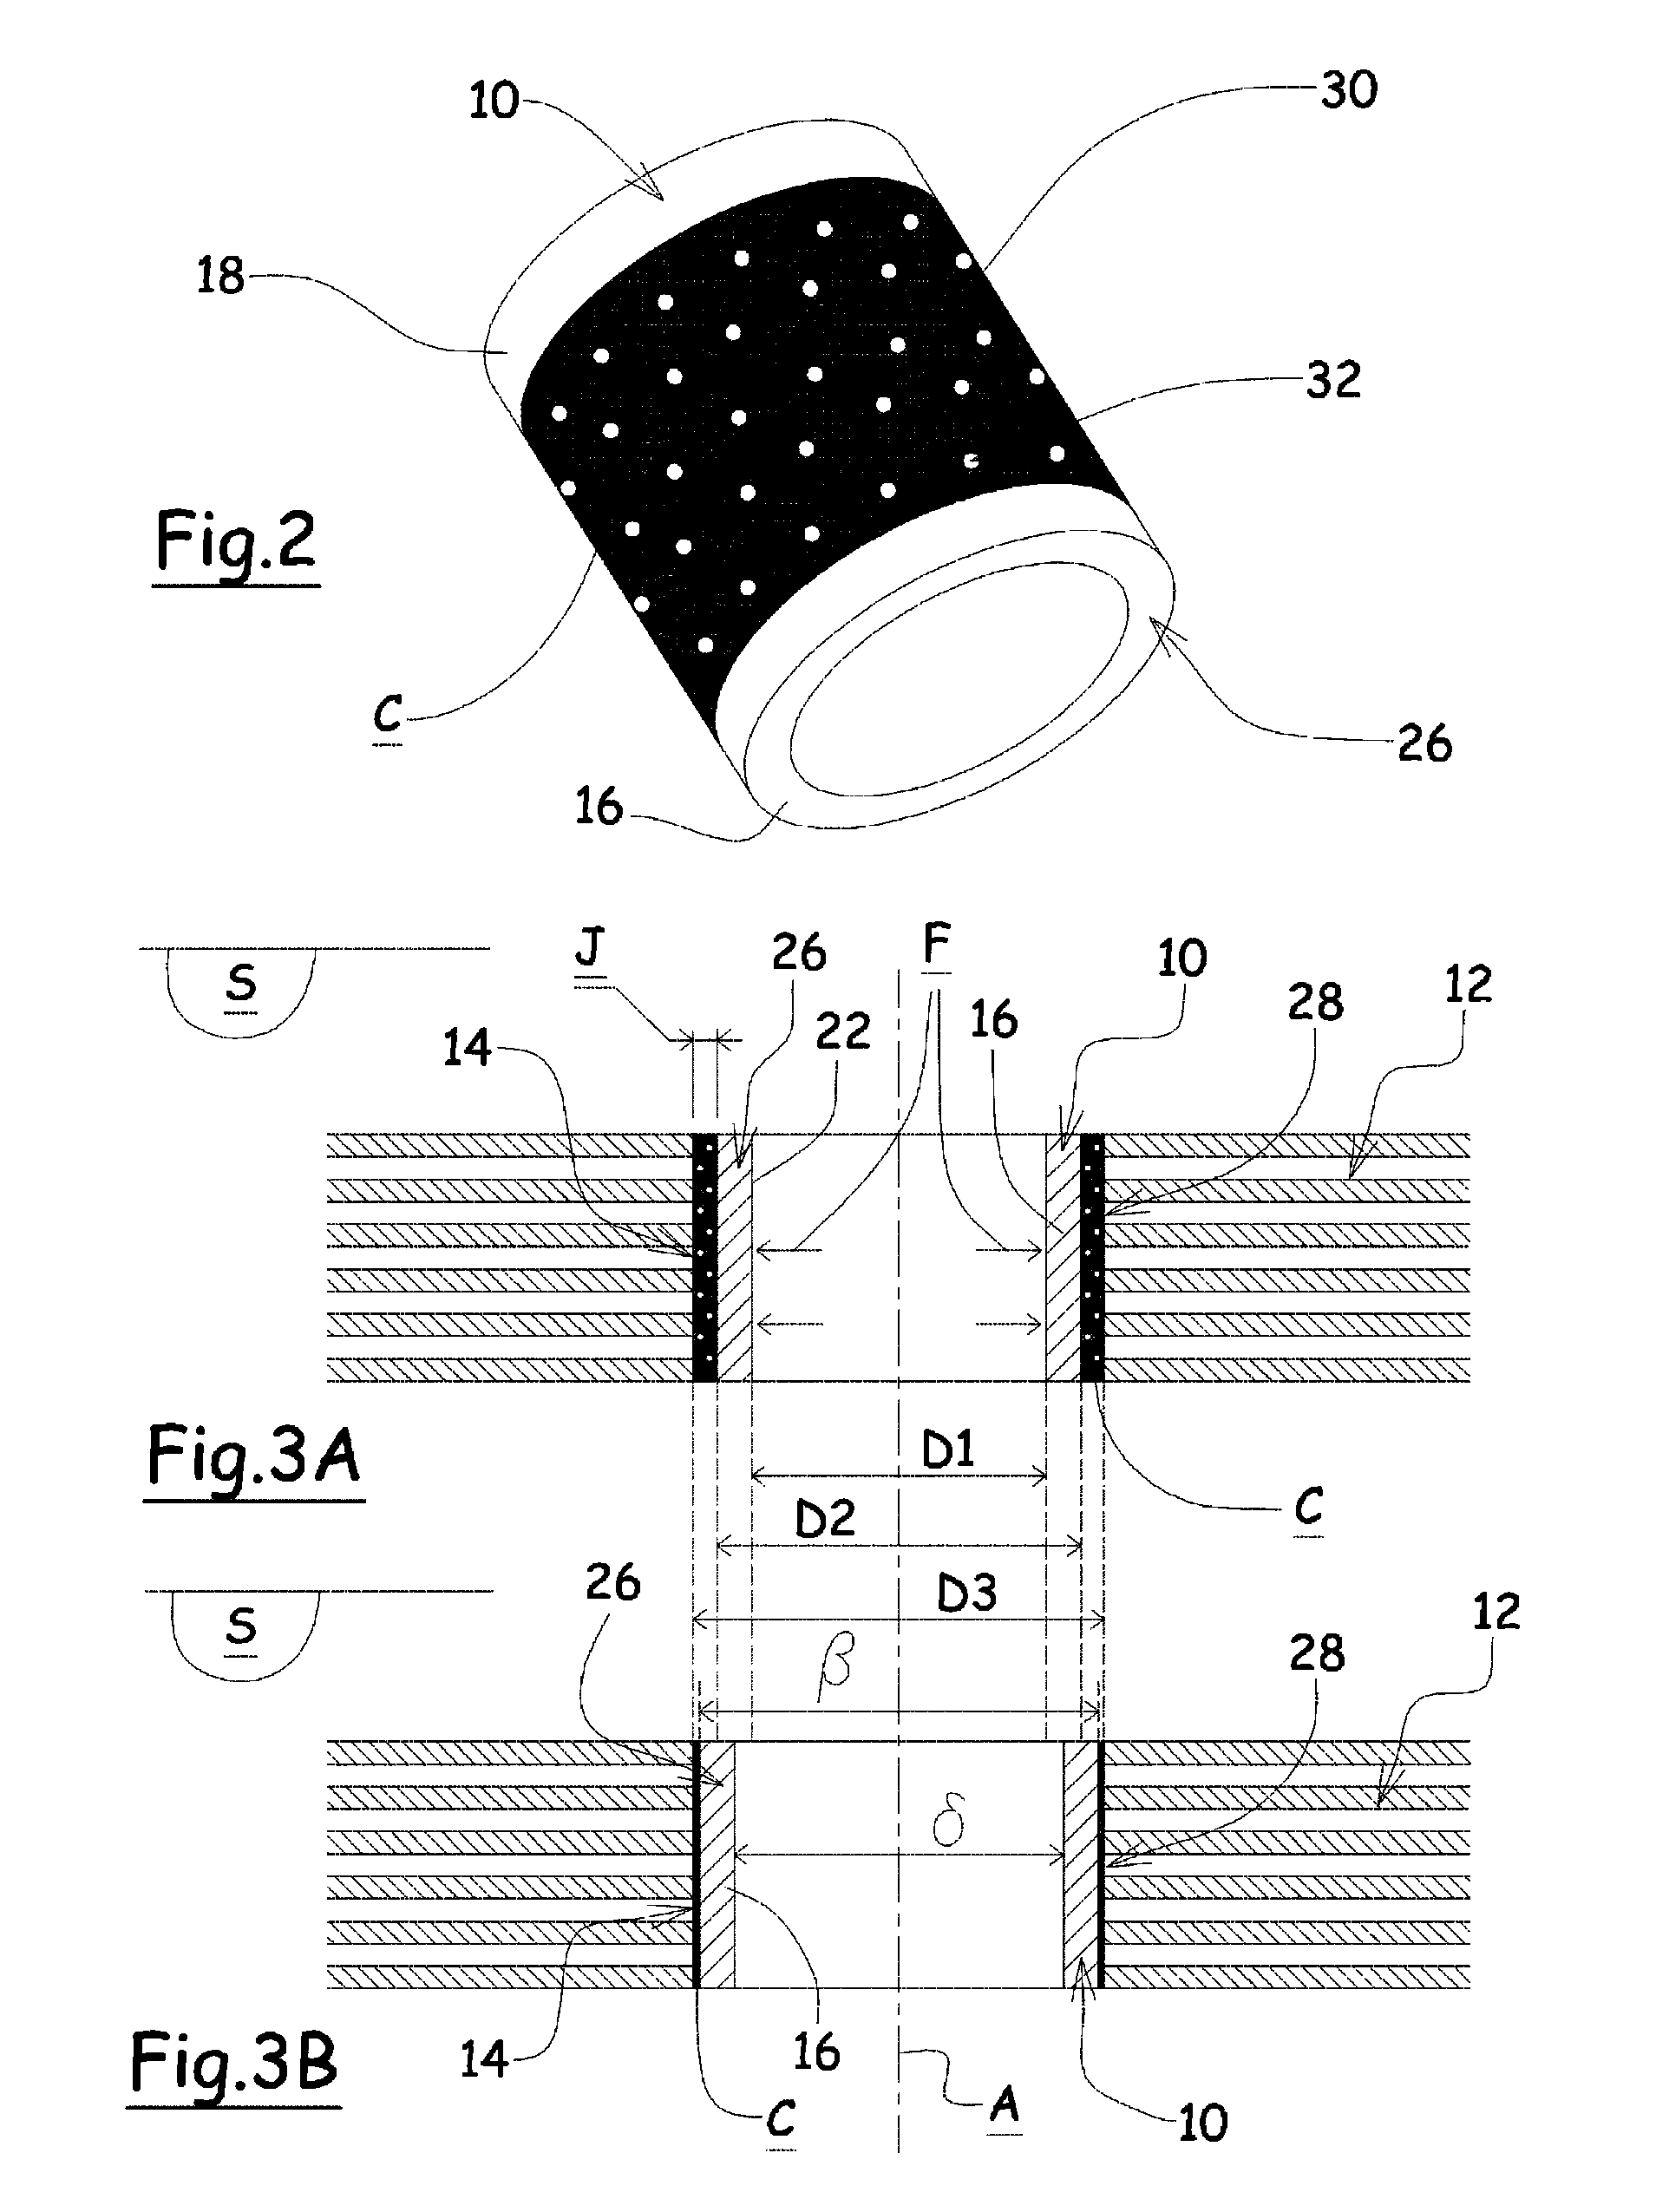 Process for mounting a metal part in a composite material part